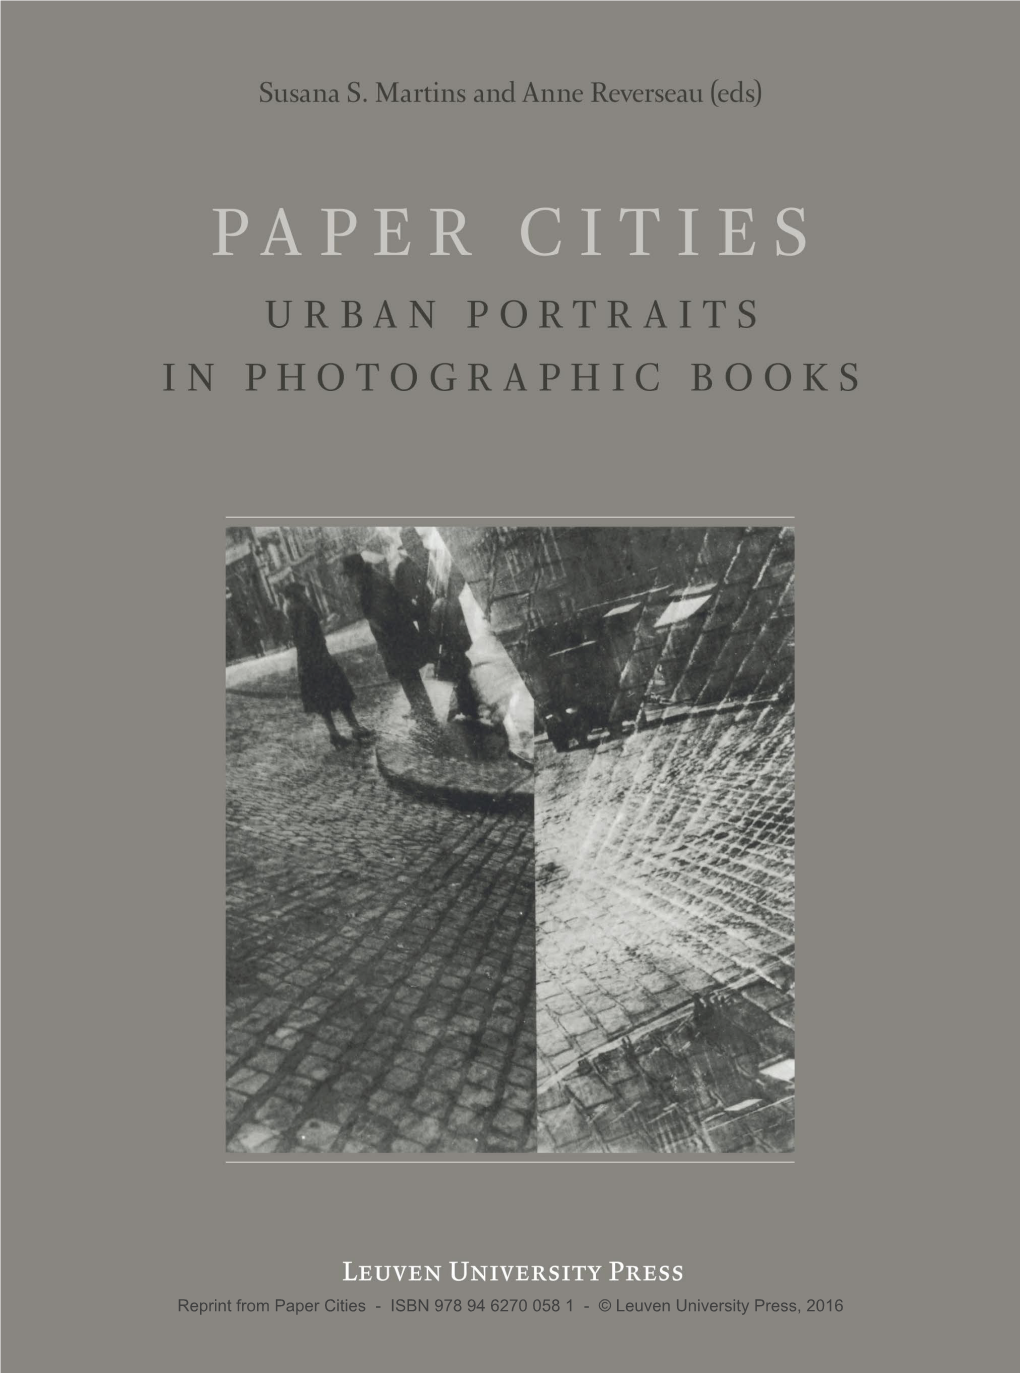 Paper Cities - ISBN 978 94 6270 058 1 - © Leuven University Press, 2016 PAPER CITIES Urban Portraits in Photographic Books Time and Photography